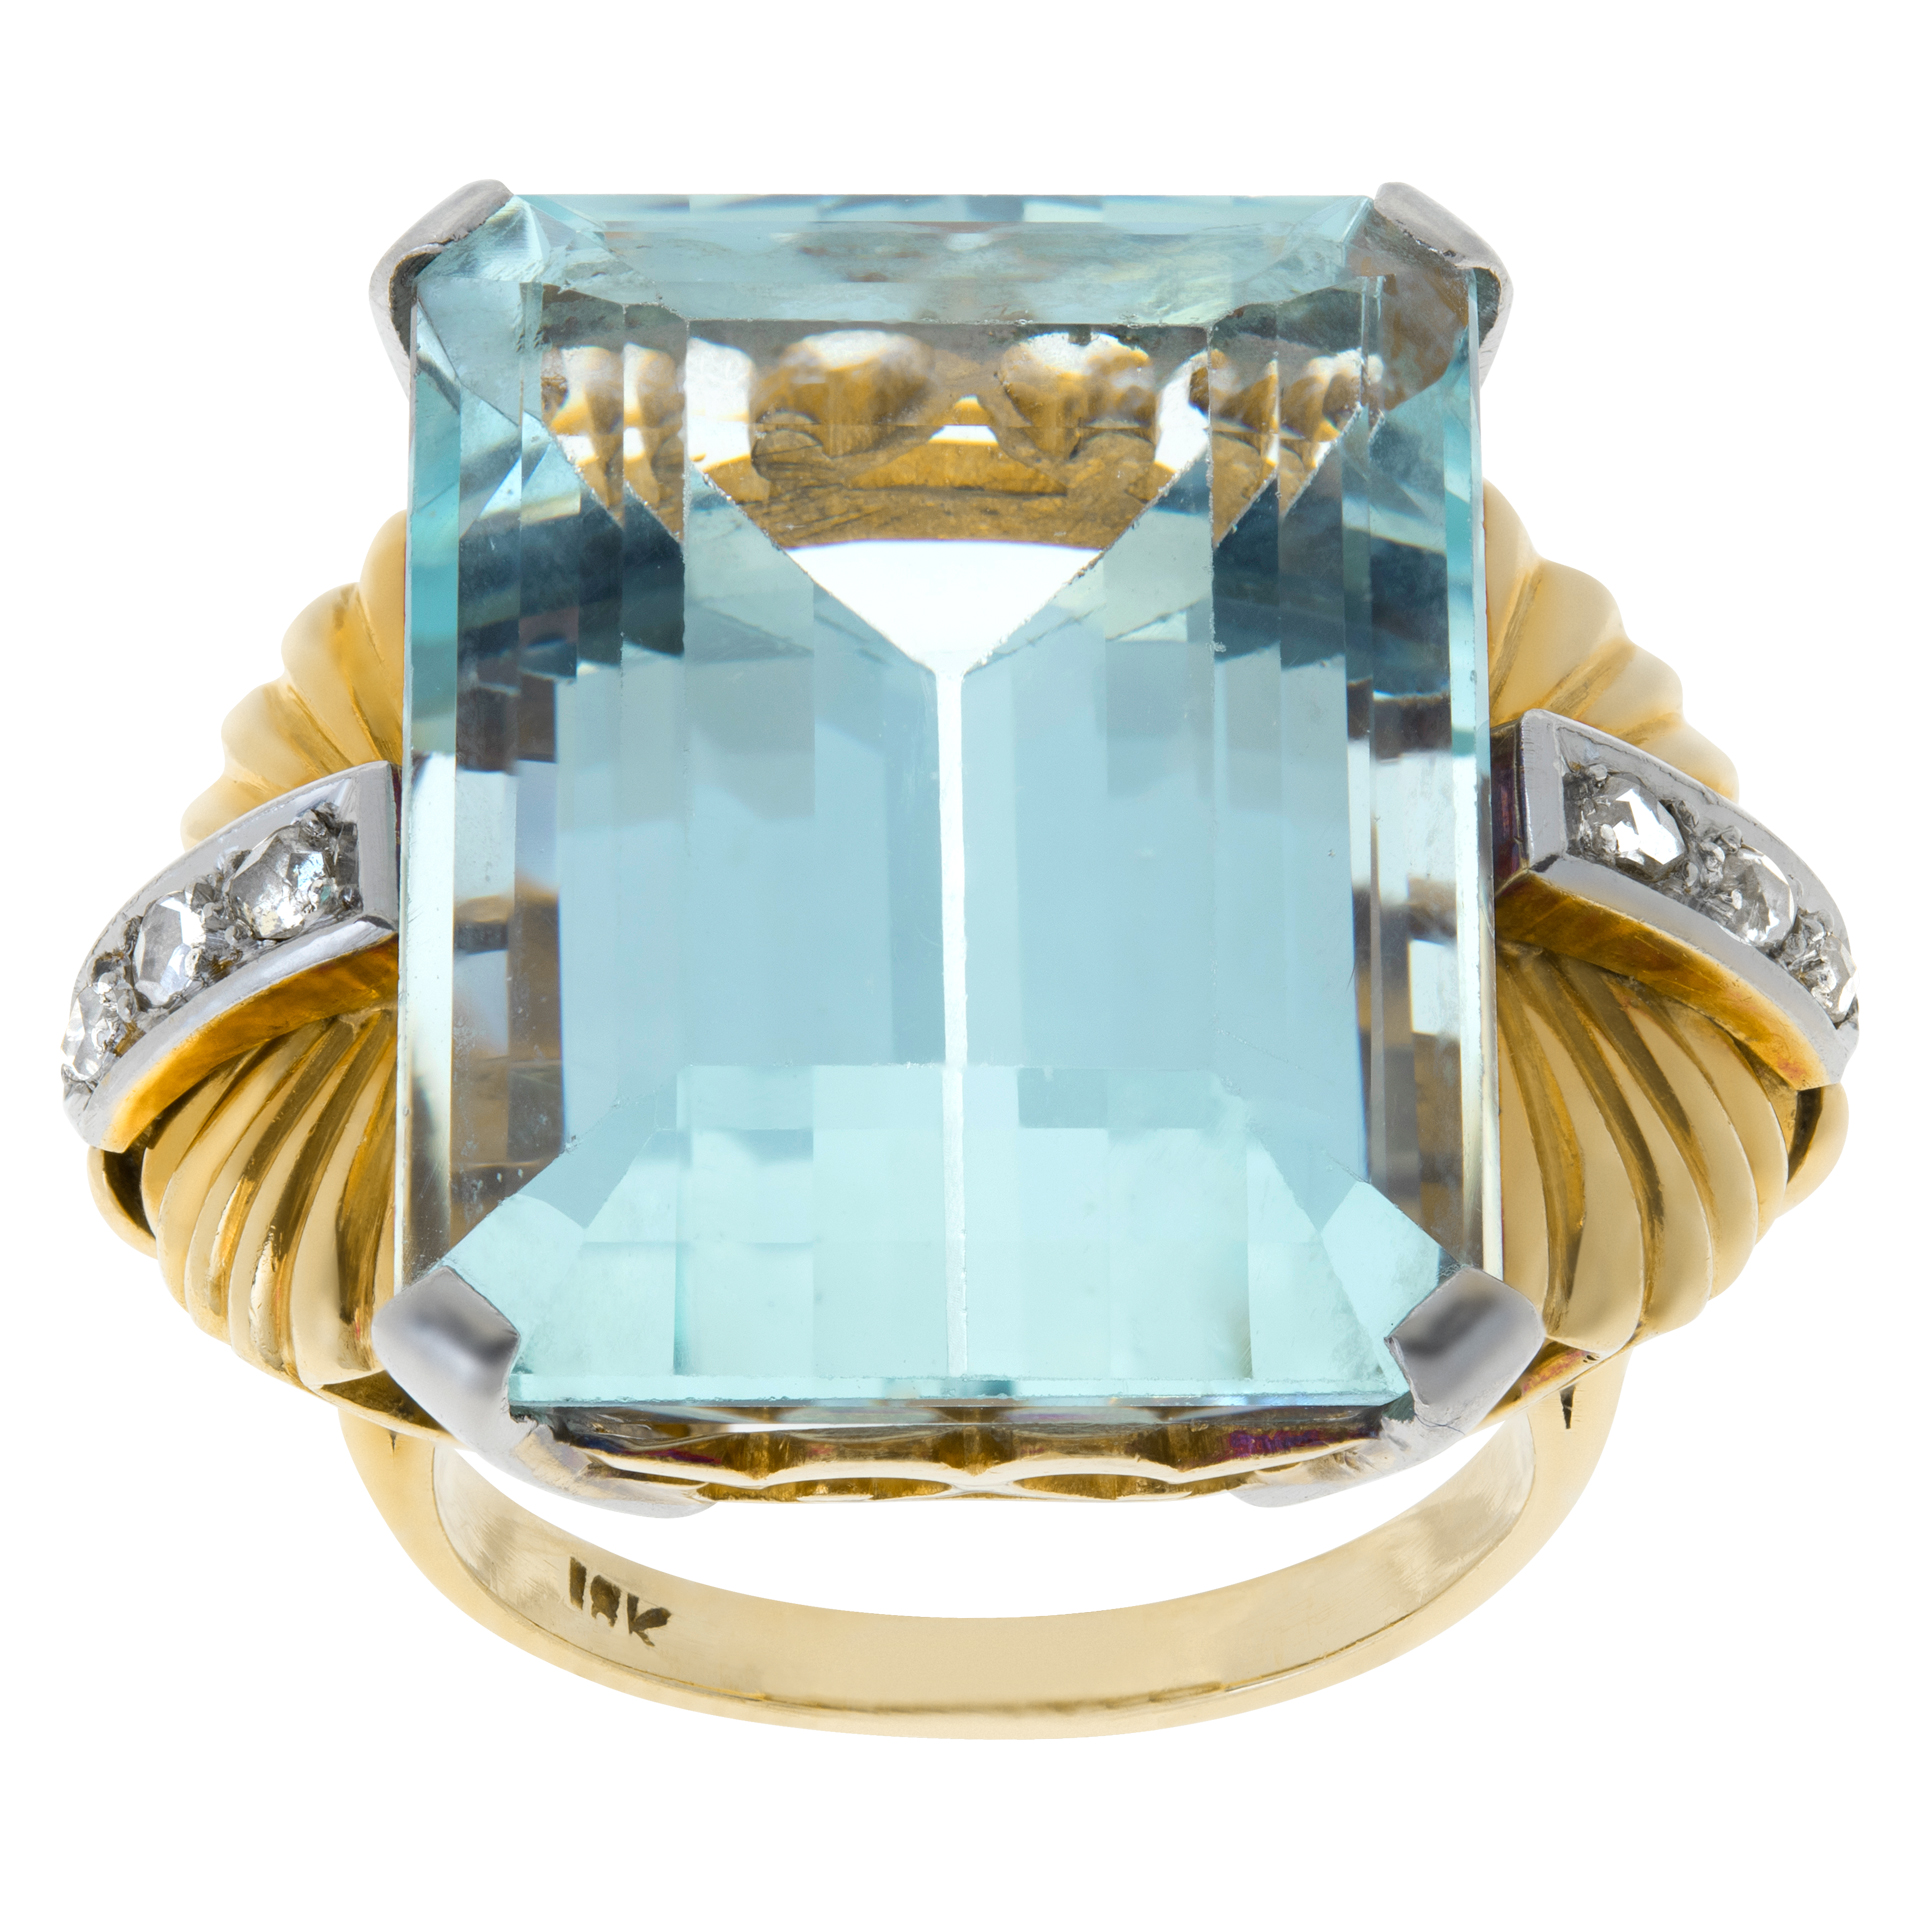 AGL certified Emerald cut Aquamarine ring approx. 30.00 carats, set in 18K white and yellow gold with 6 old cut diamonds accent image 1